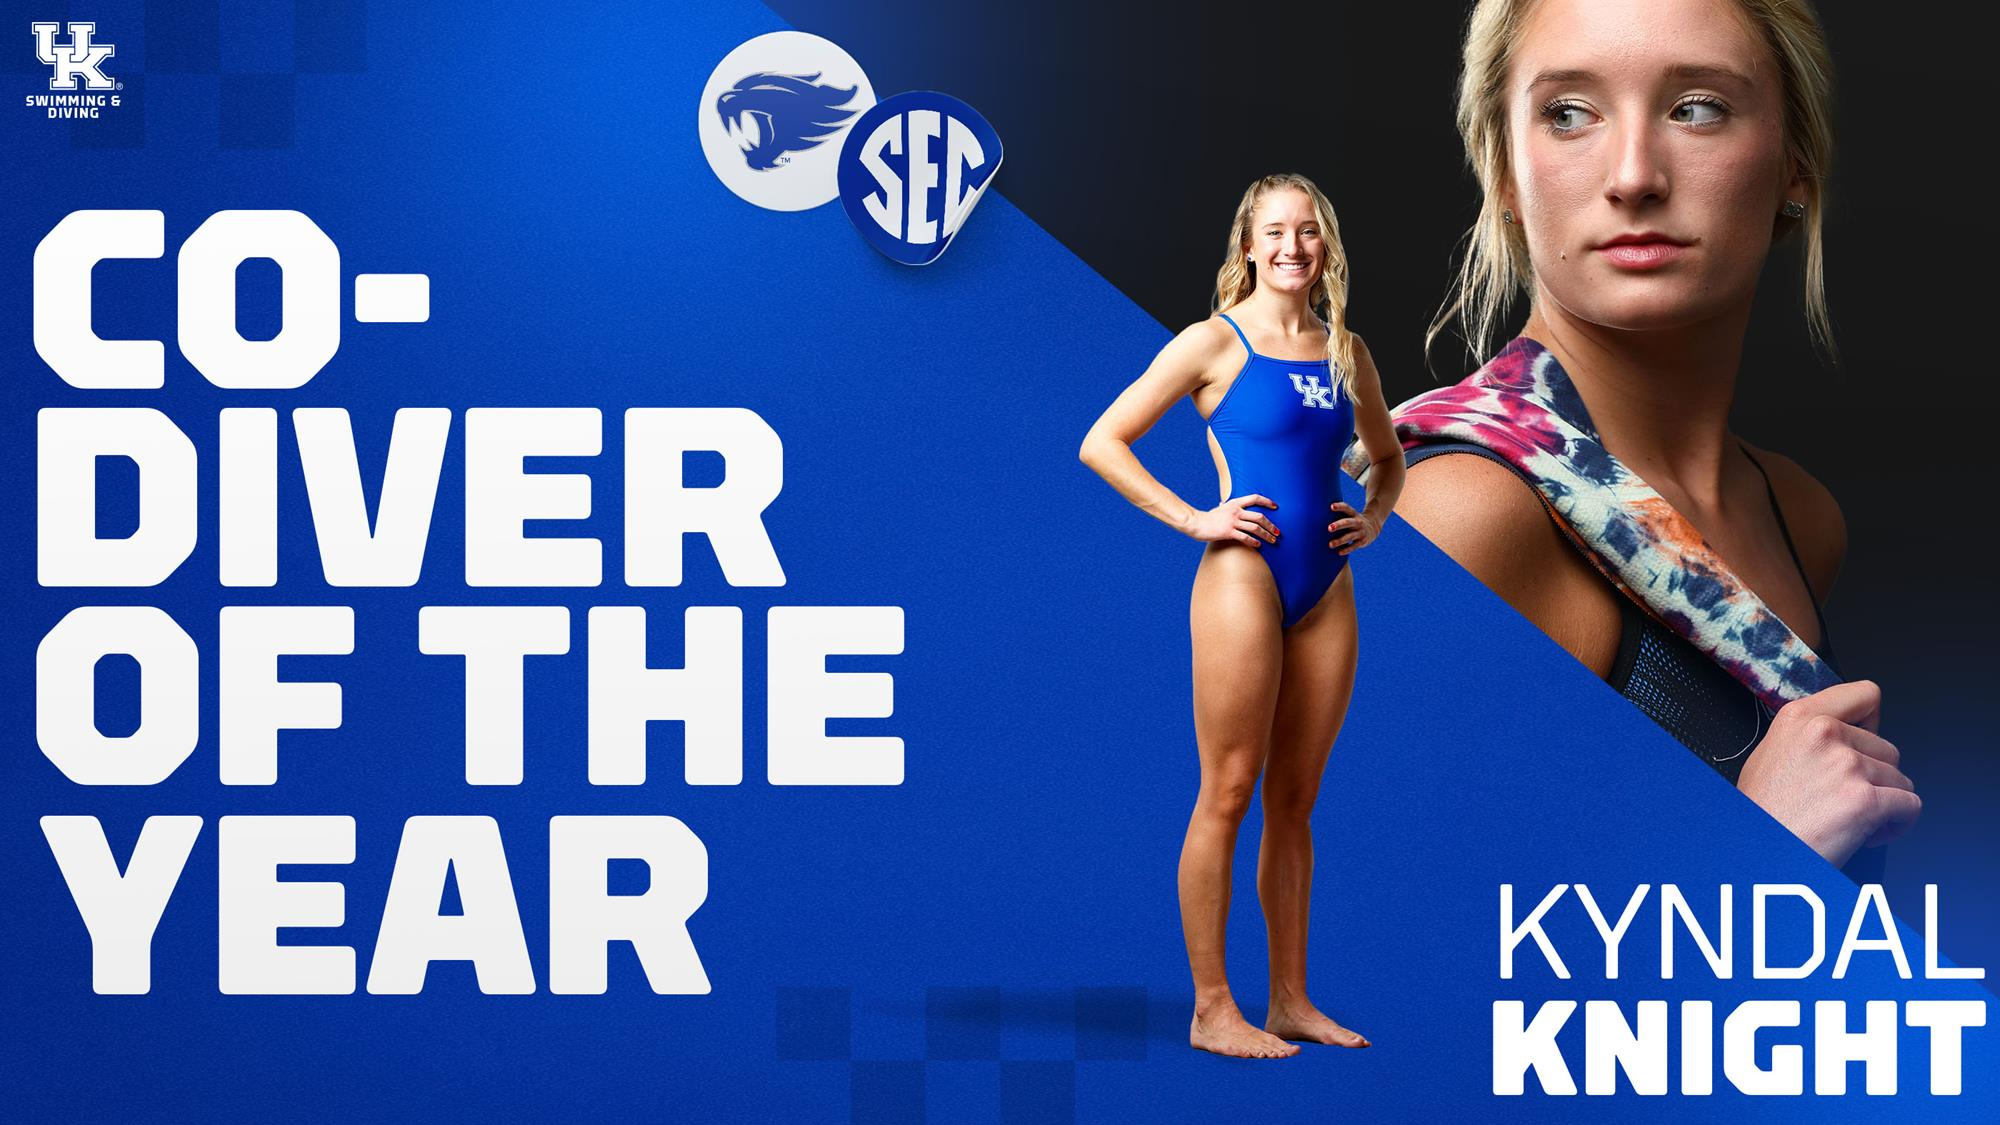 Kyndal Knight Named SEC Co-Diver of the Year